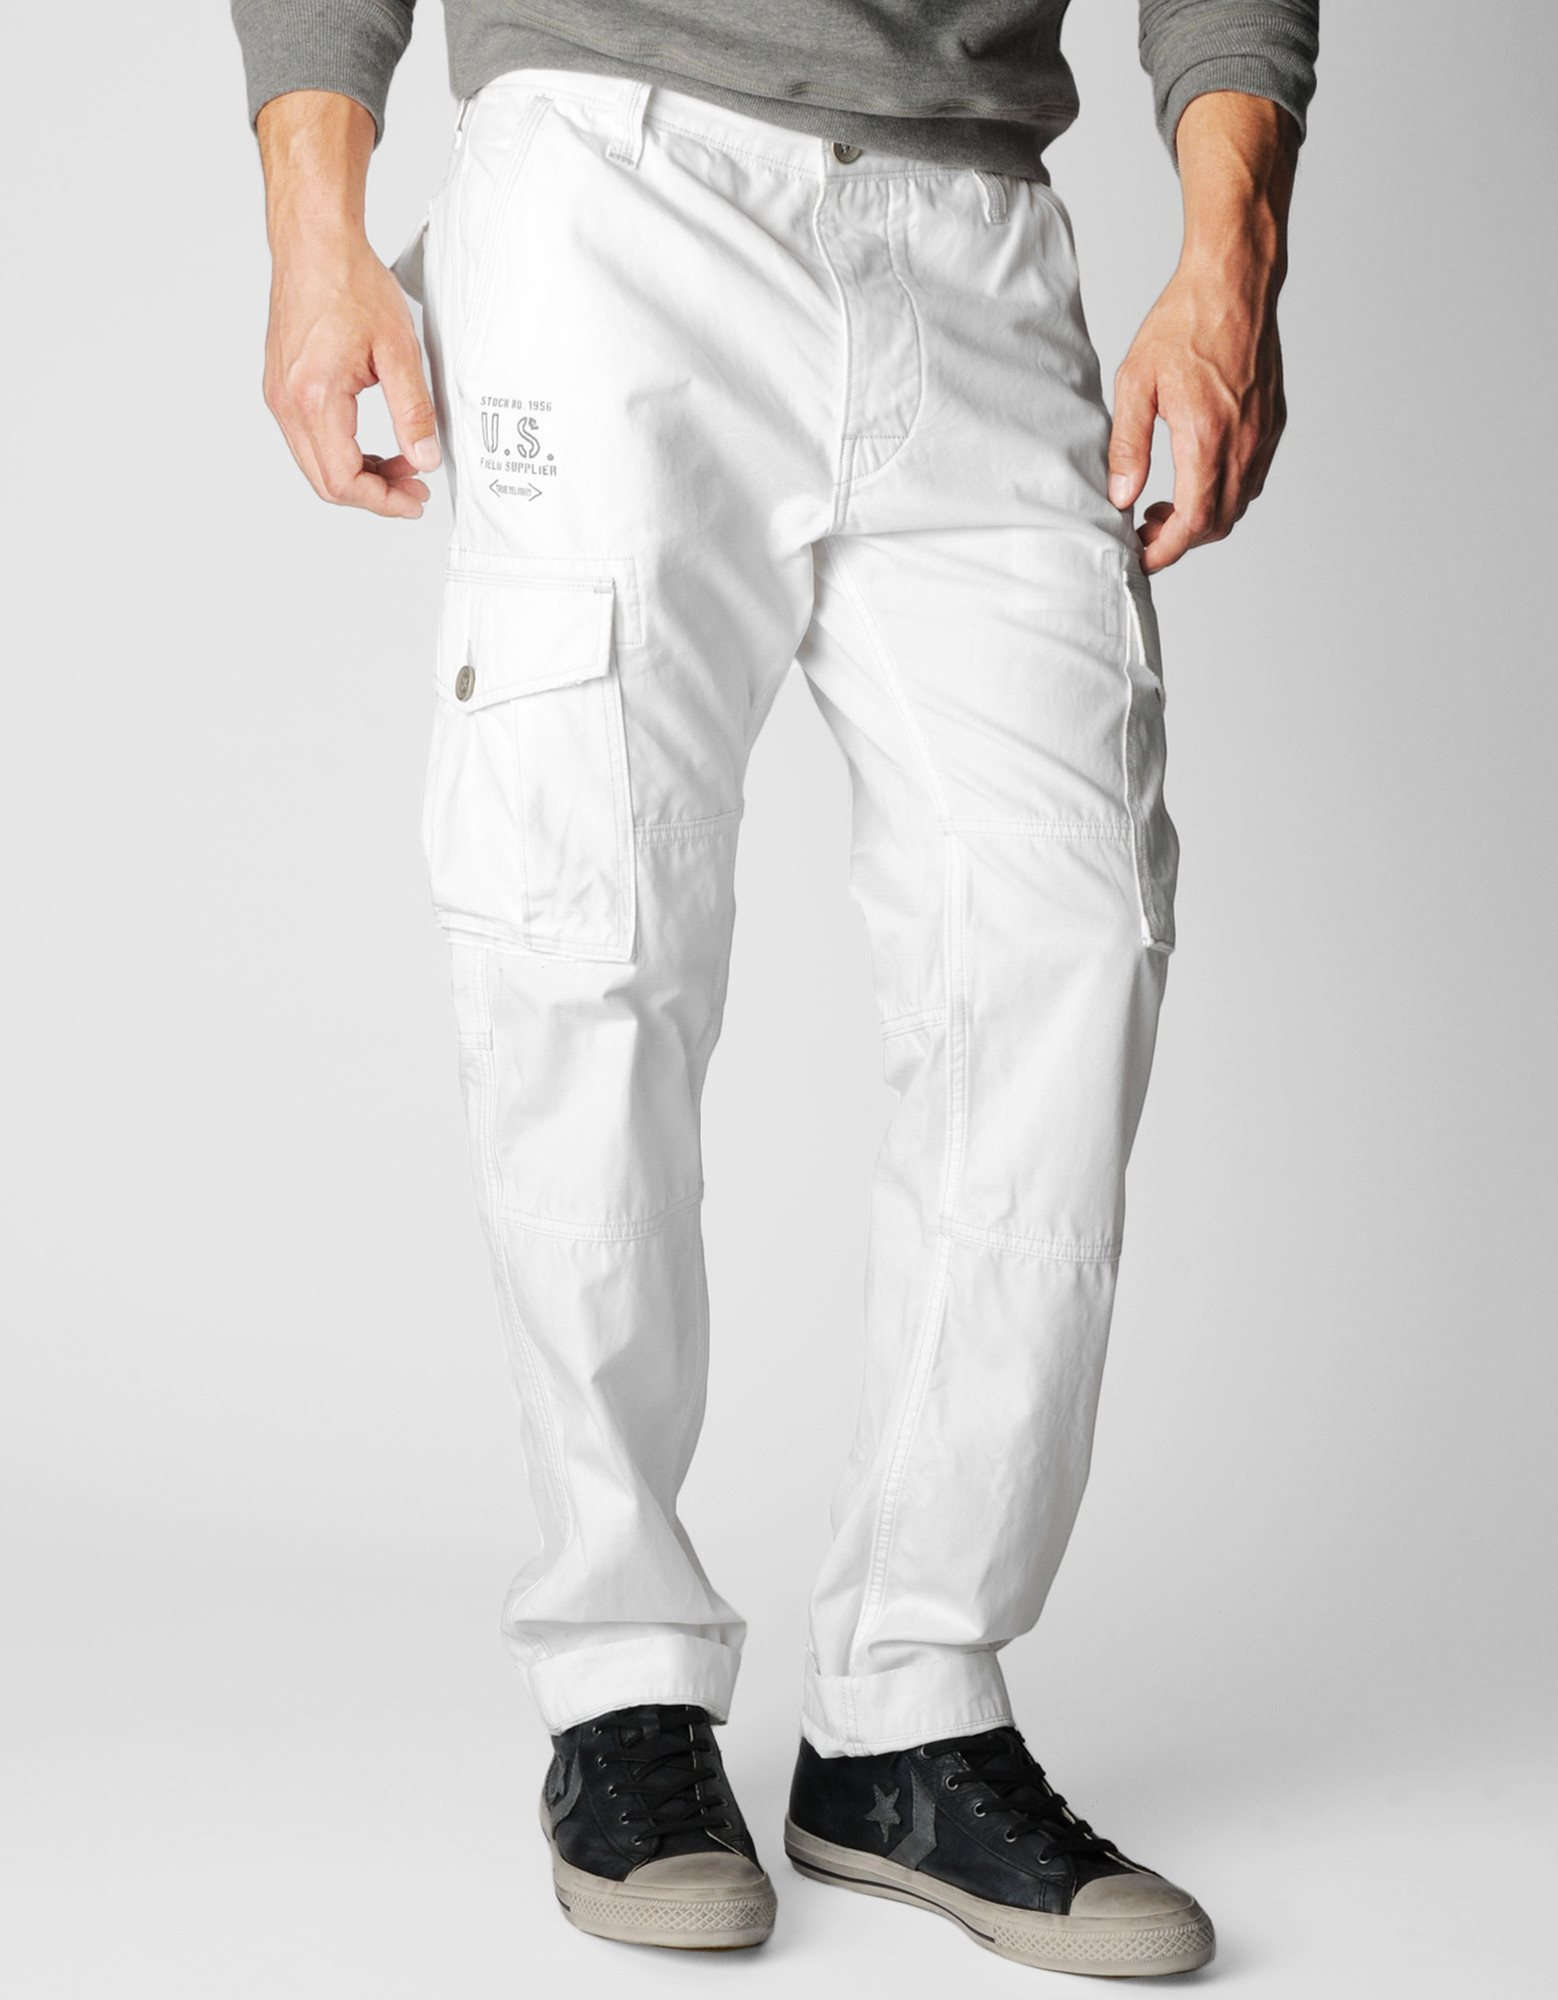 True Religion Special Ops Mens Cargo Pant in White for Men - Lyst